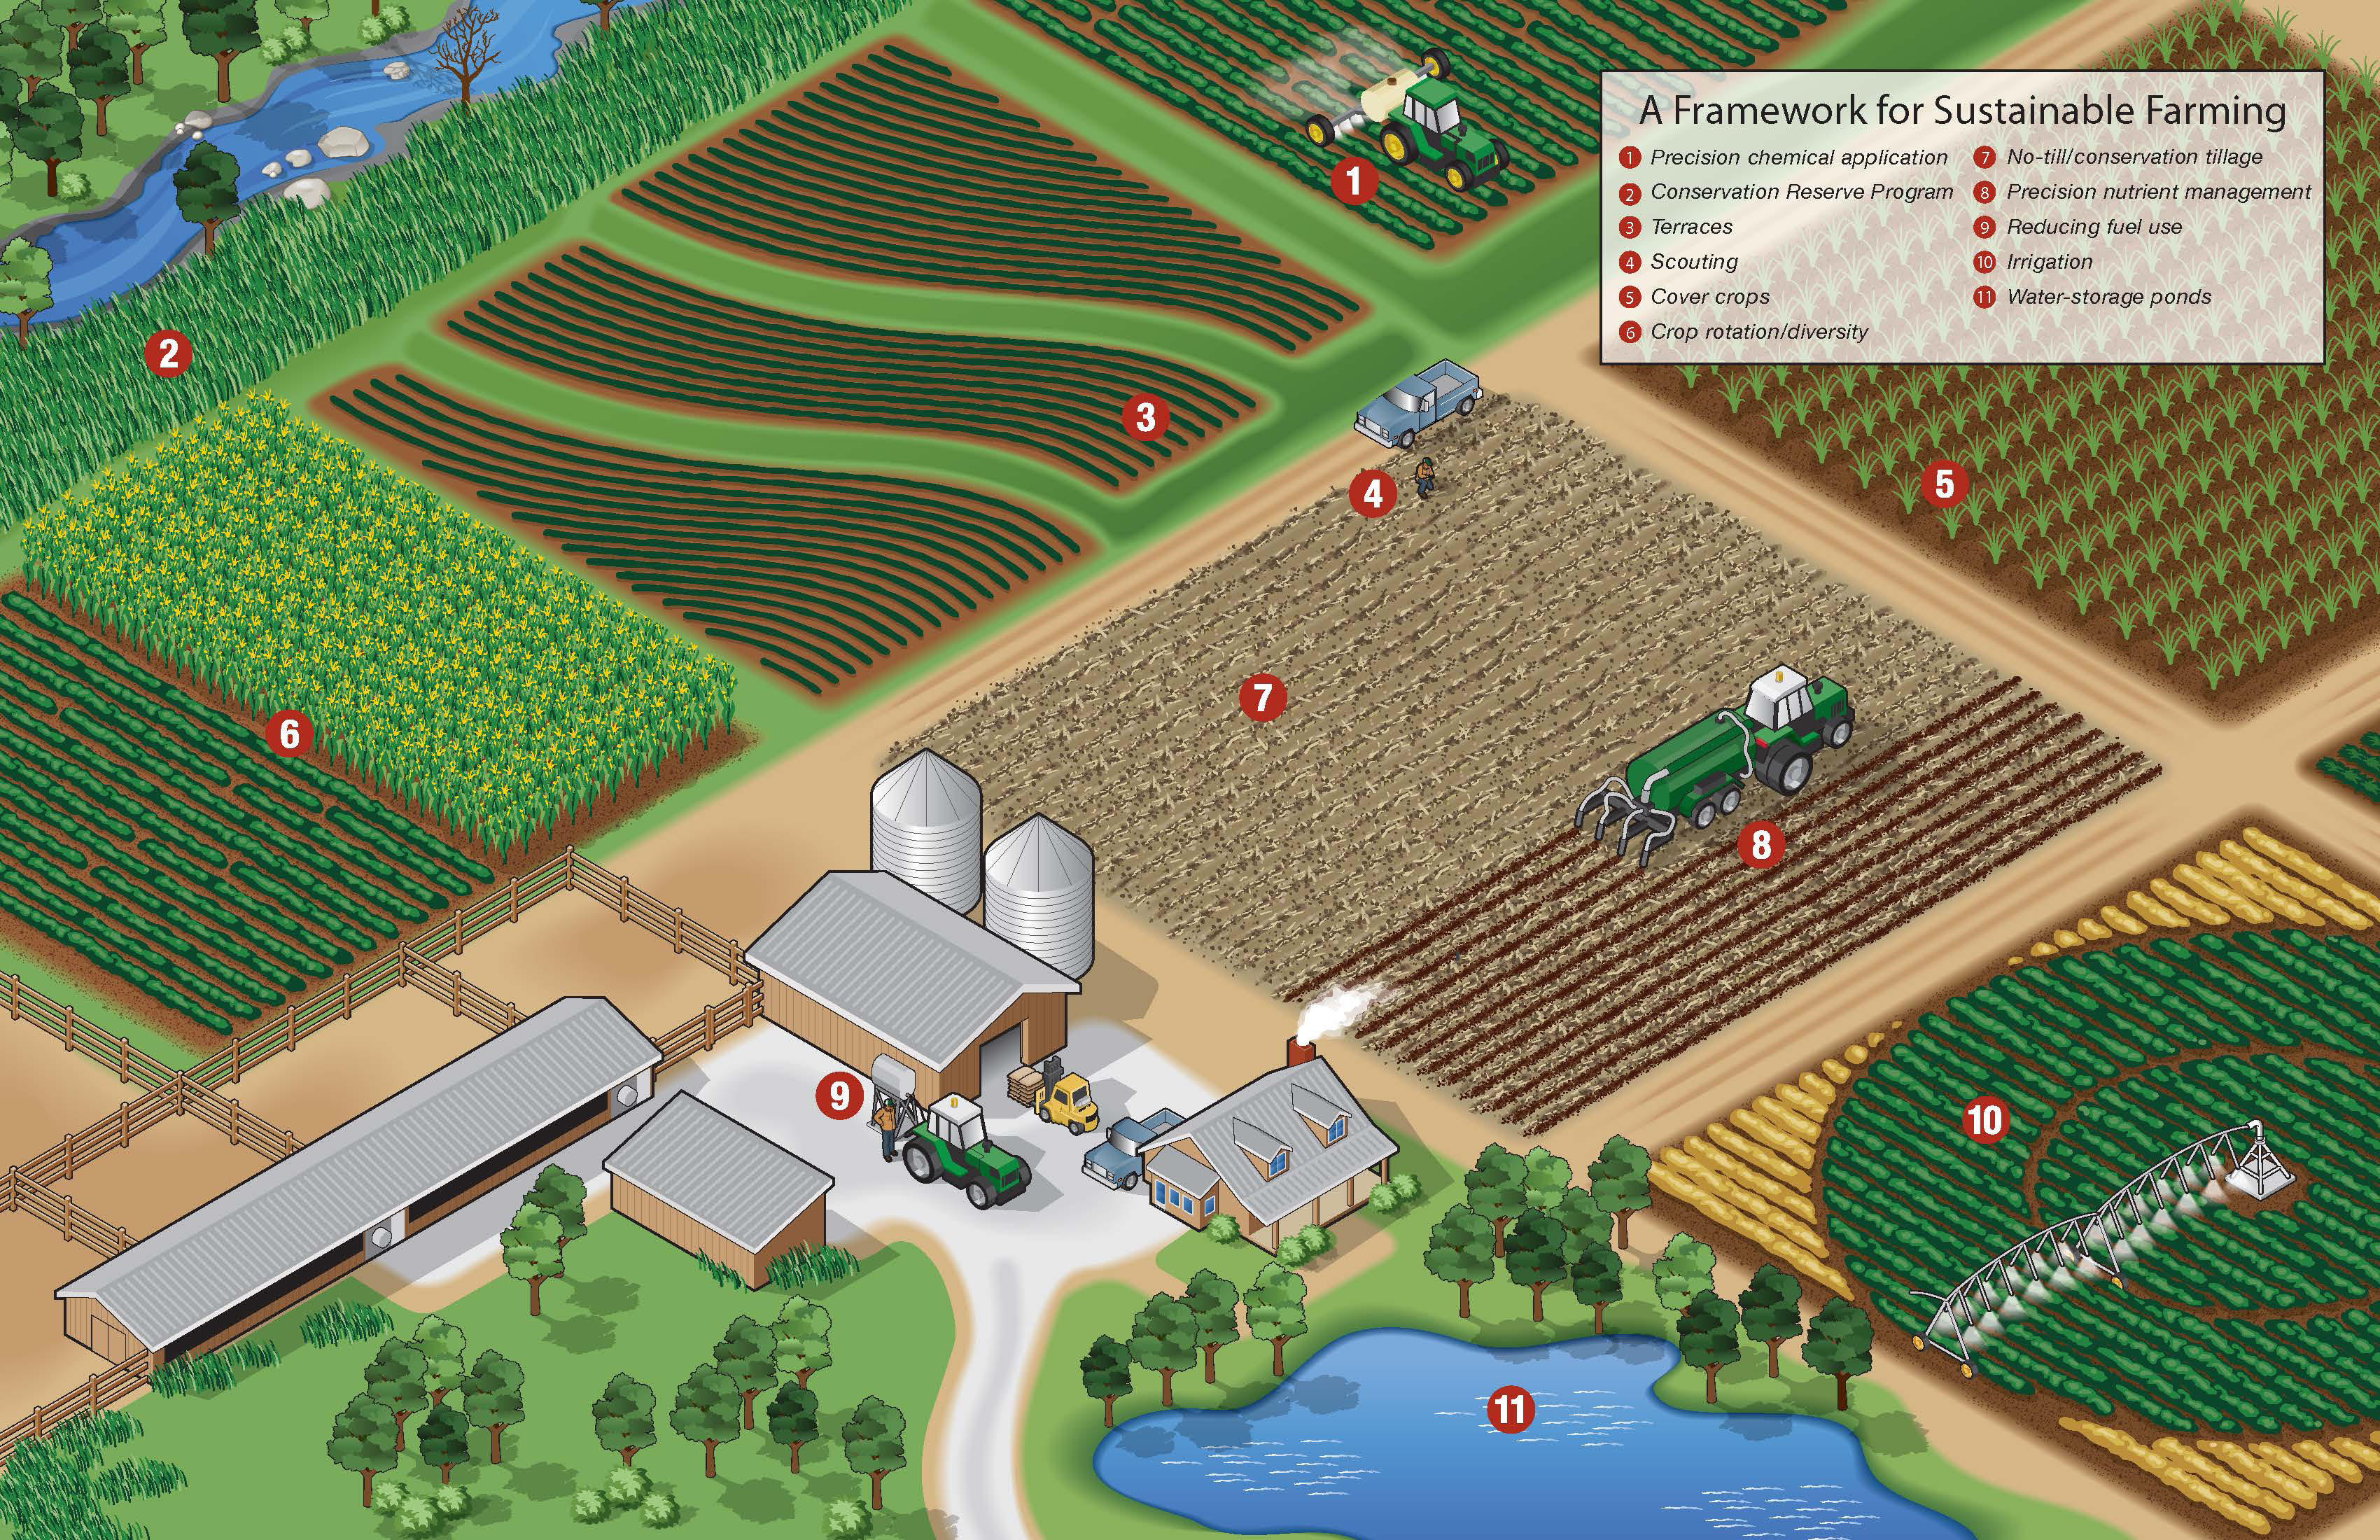 A framework for sustainable farming. Each strategy is labeled in an aerial view of a farm.